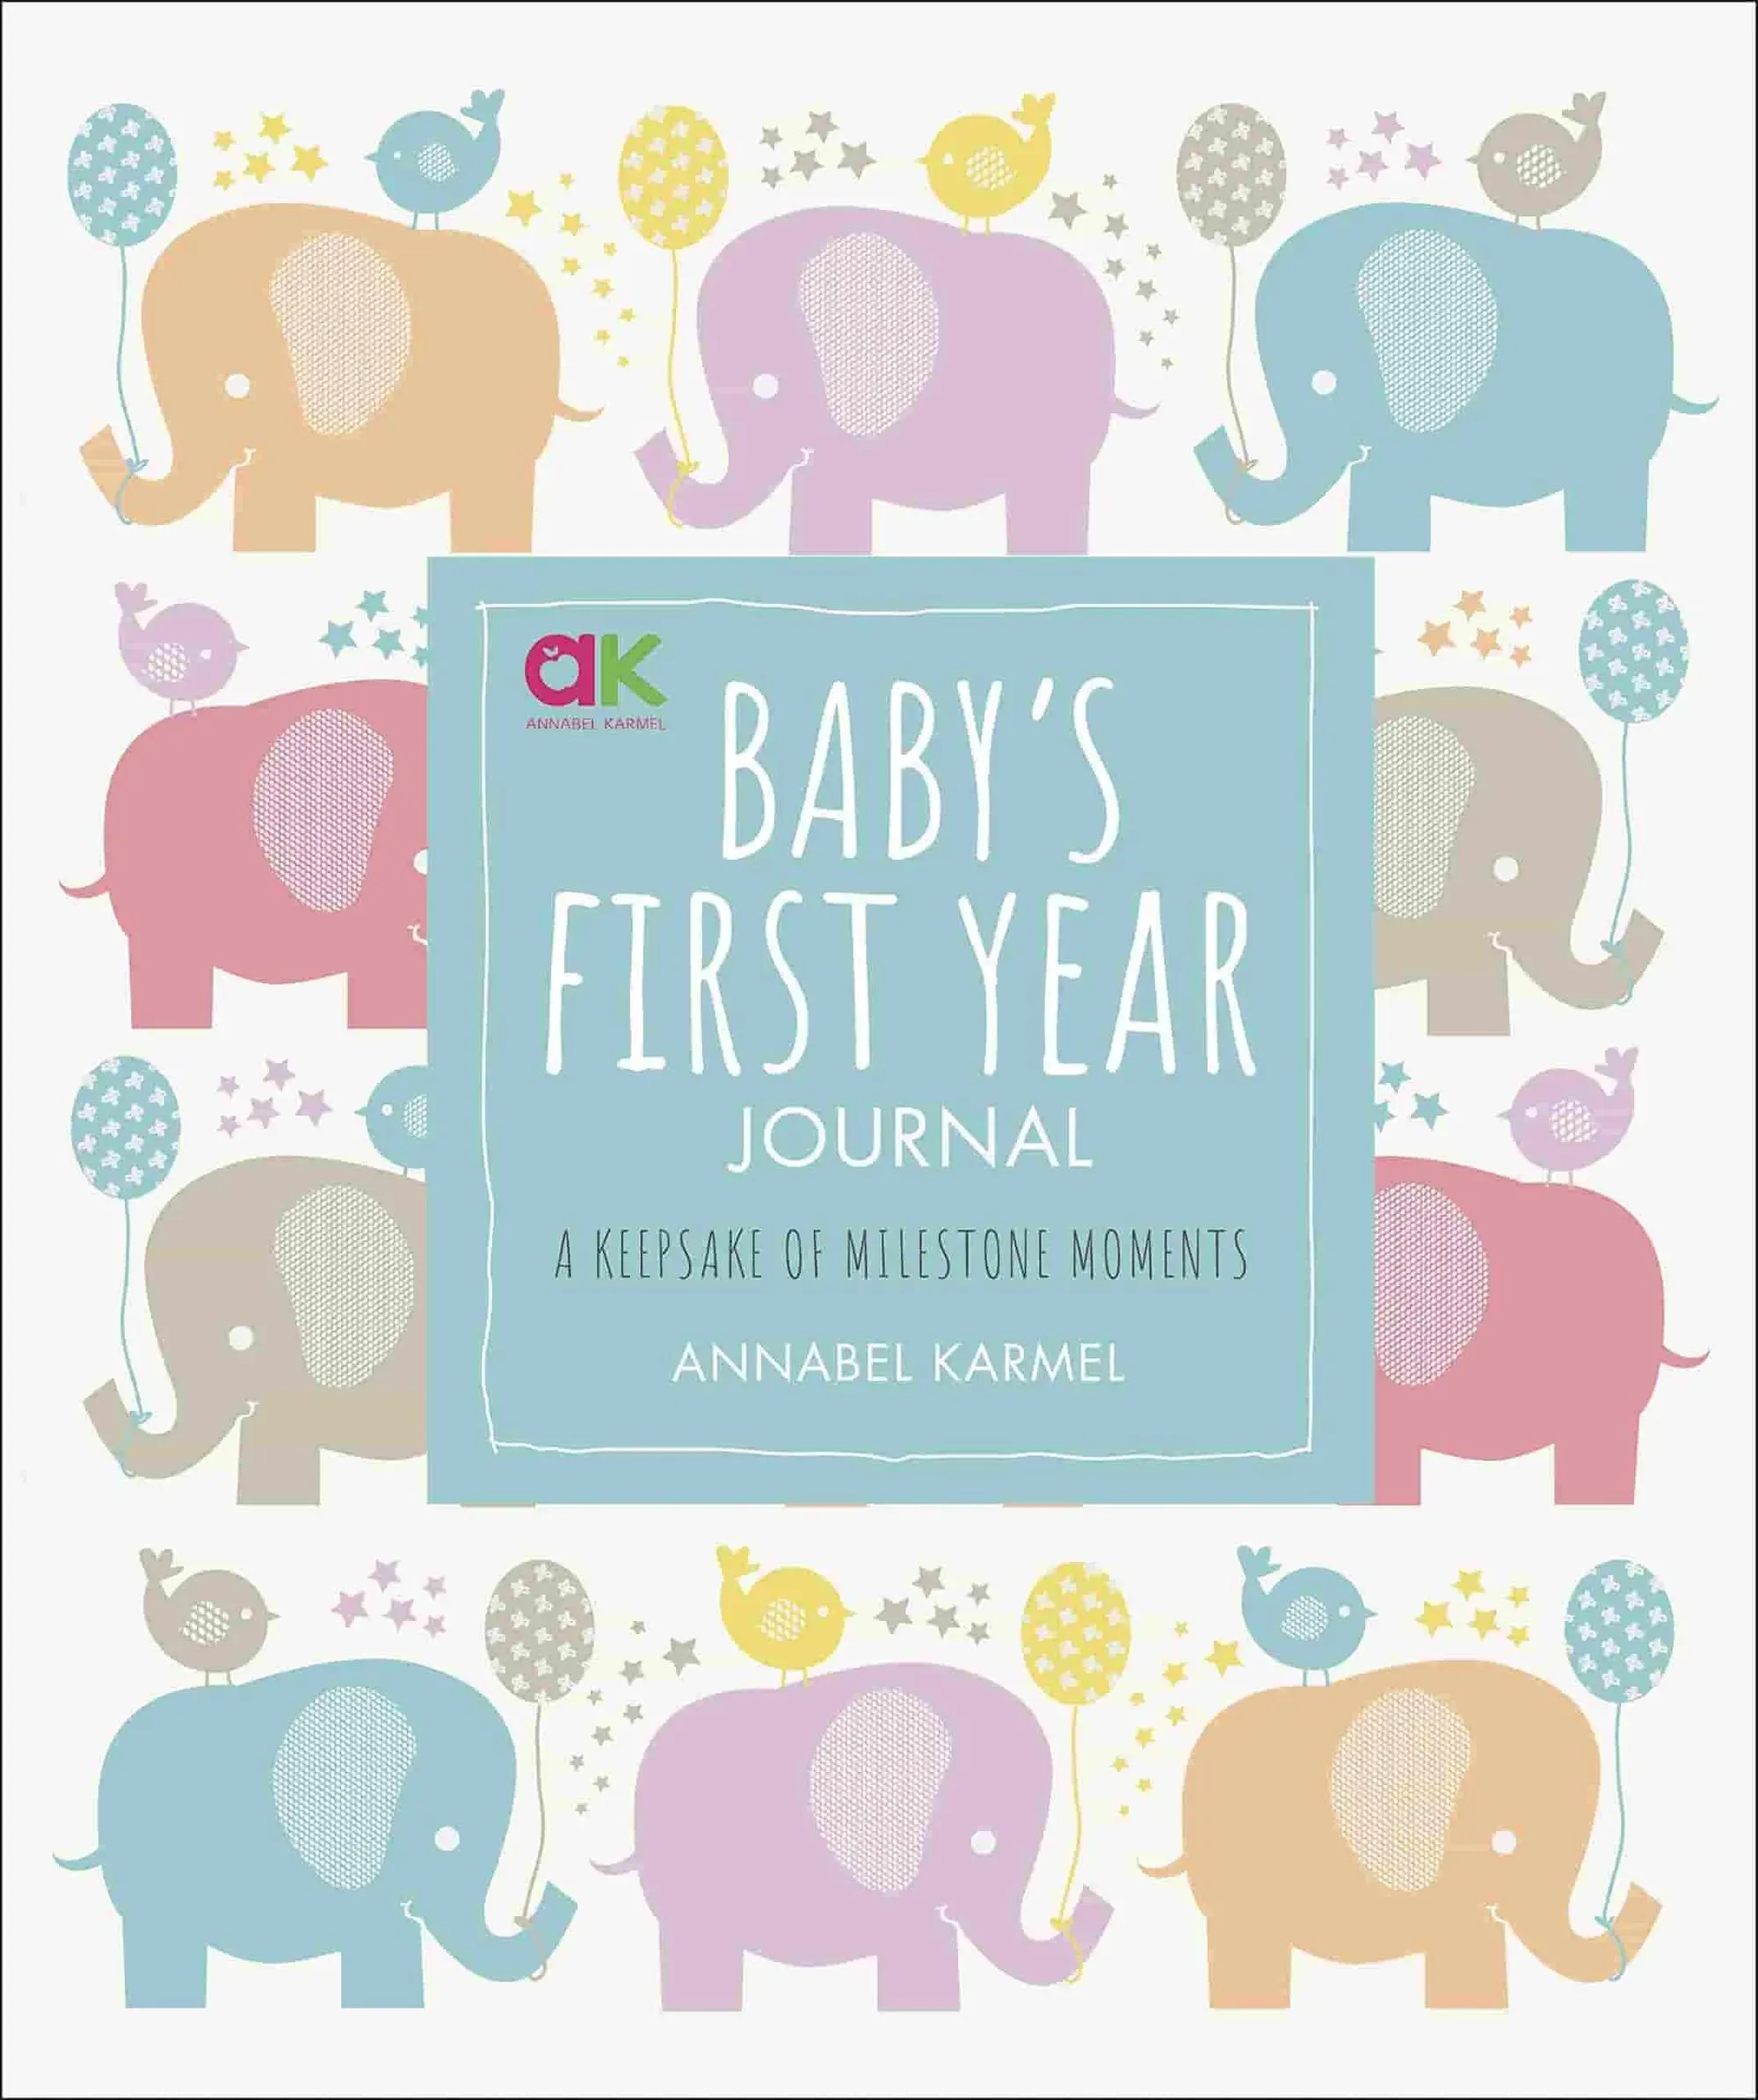 Baby’s First Year by Annabel Karmel